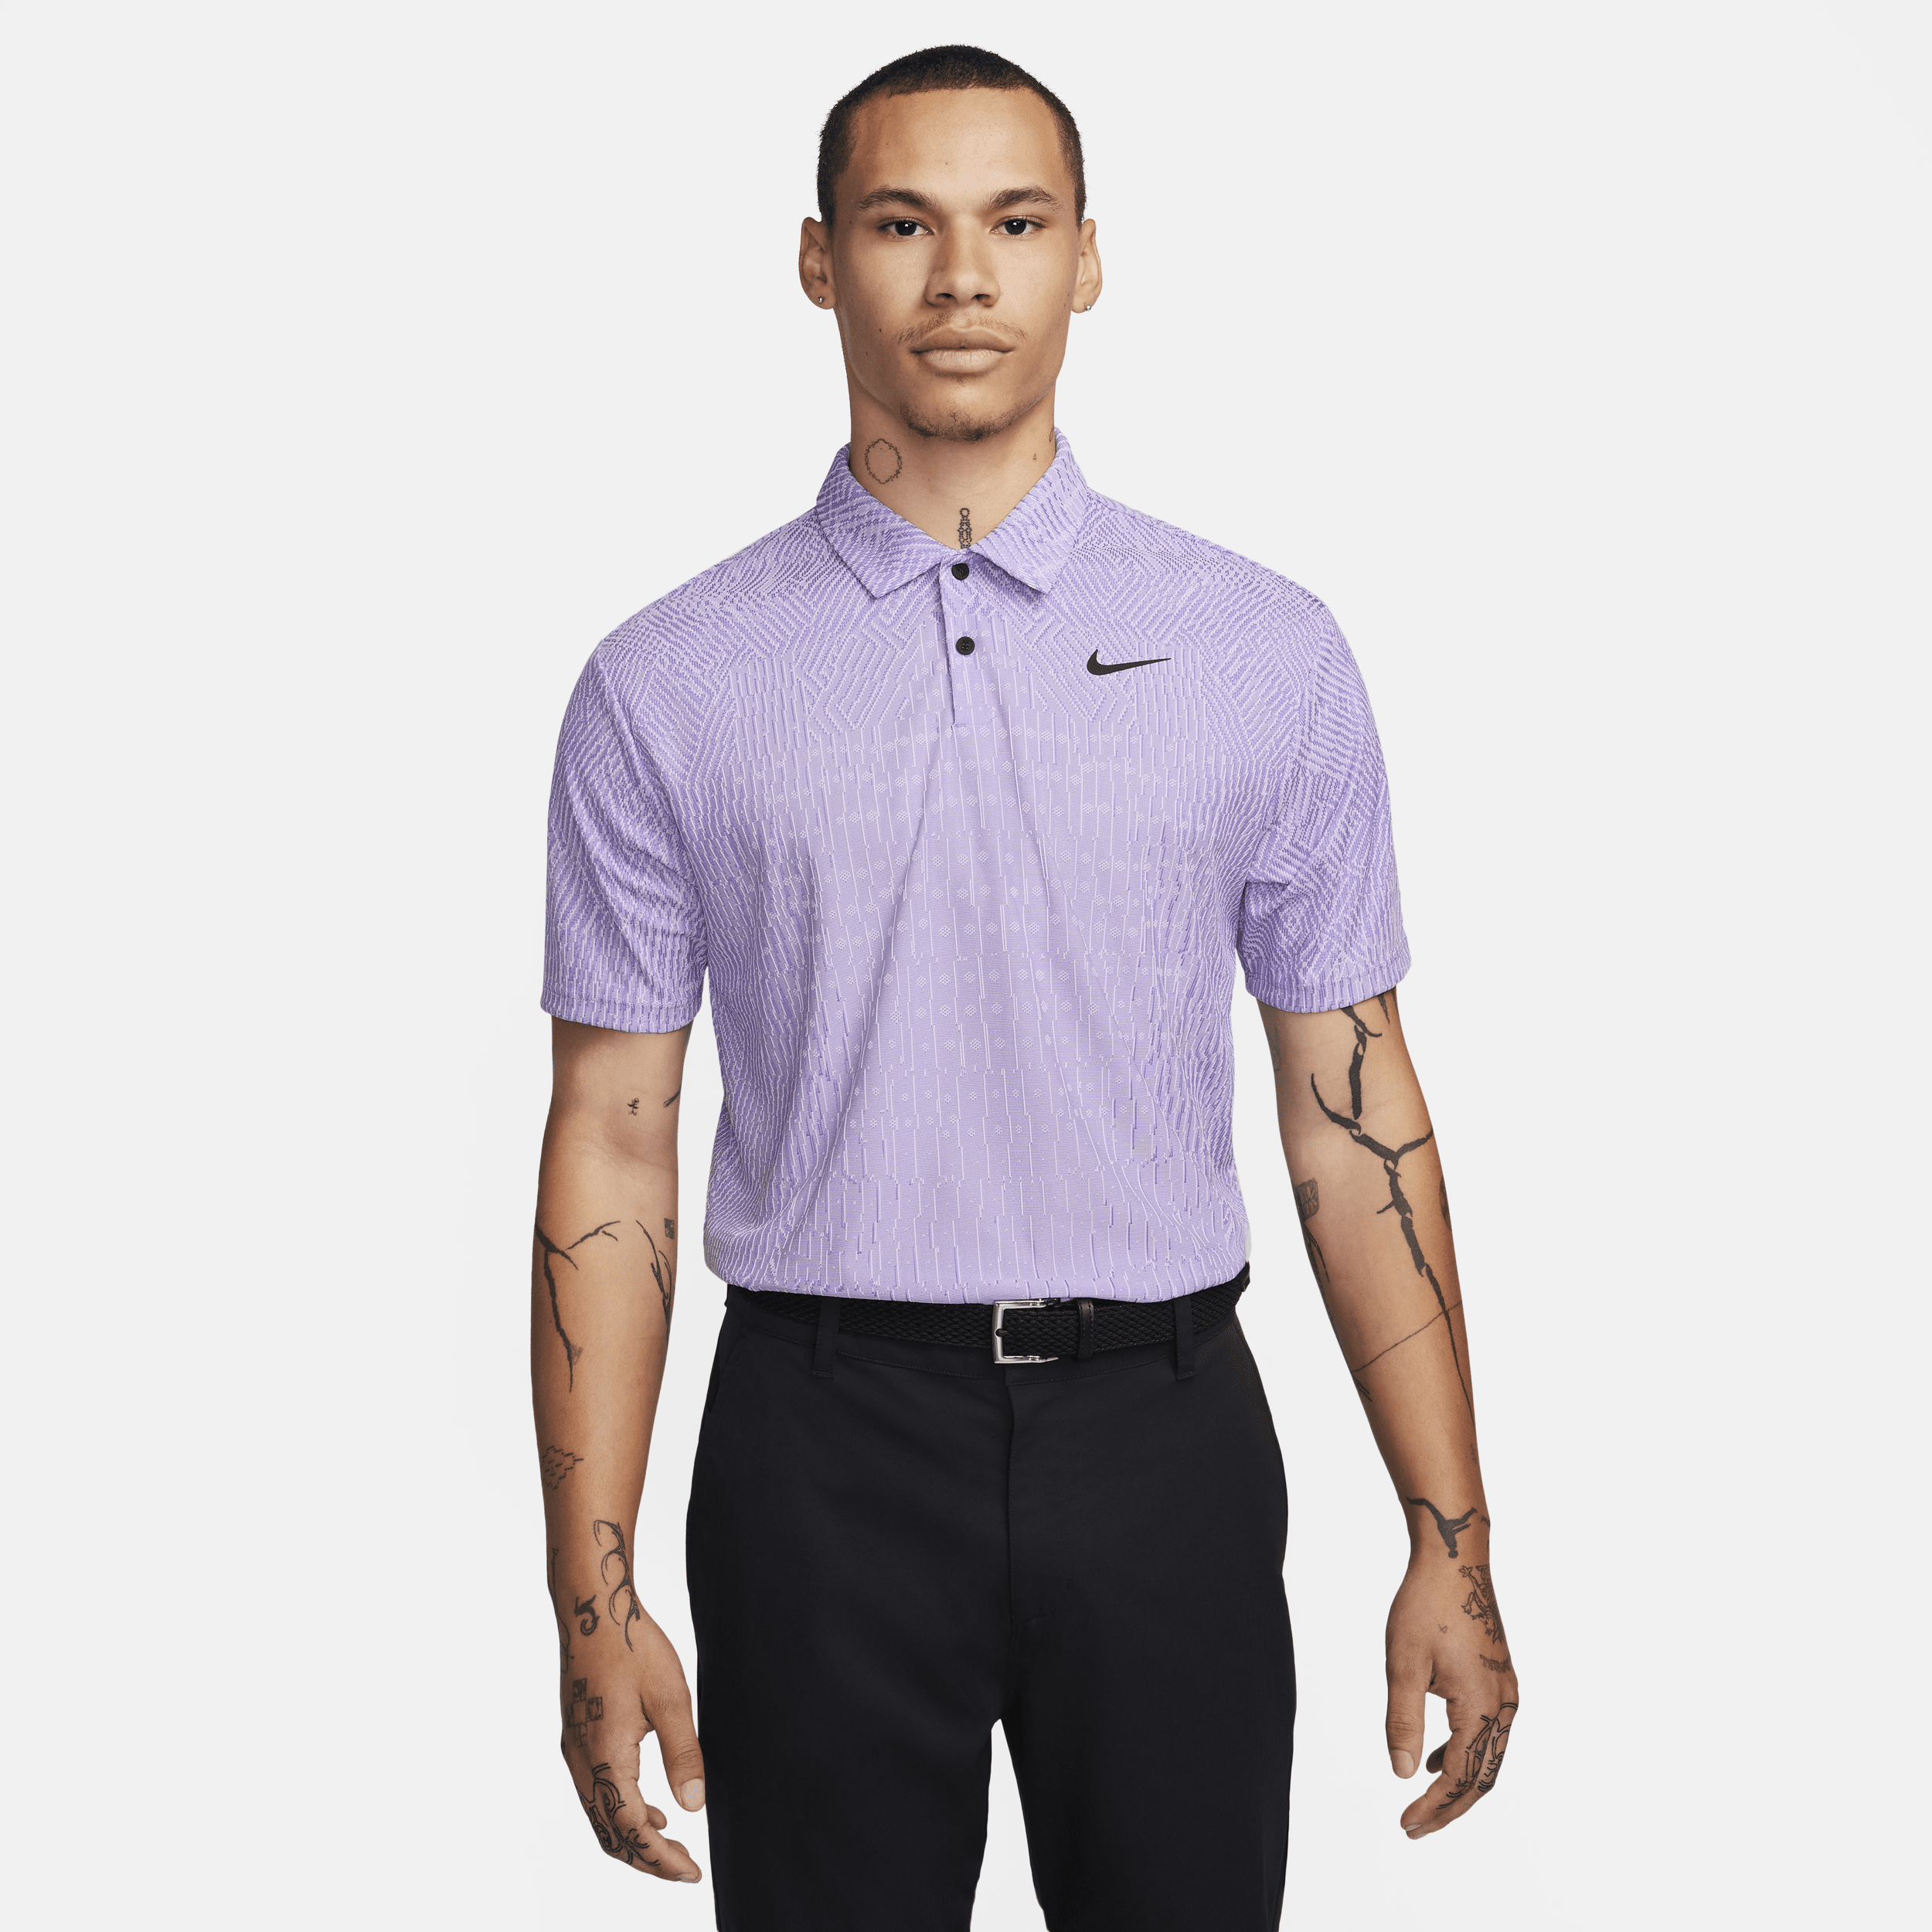 Nike Tour Dri-FIT ADV golfpolo voor heren Paars